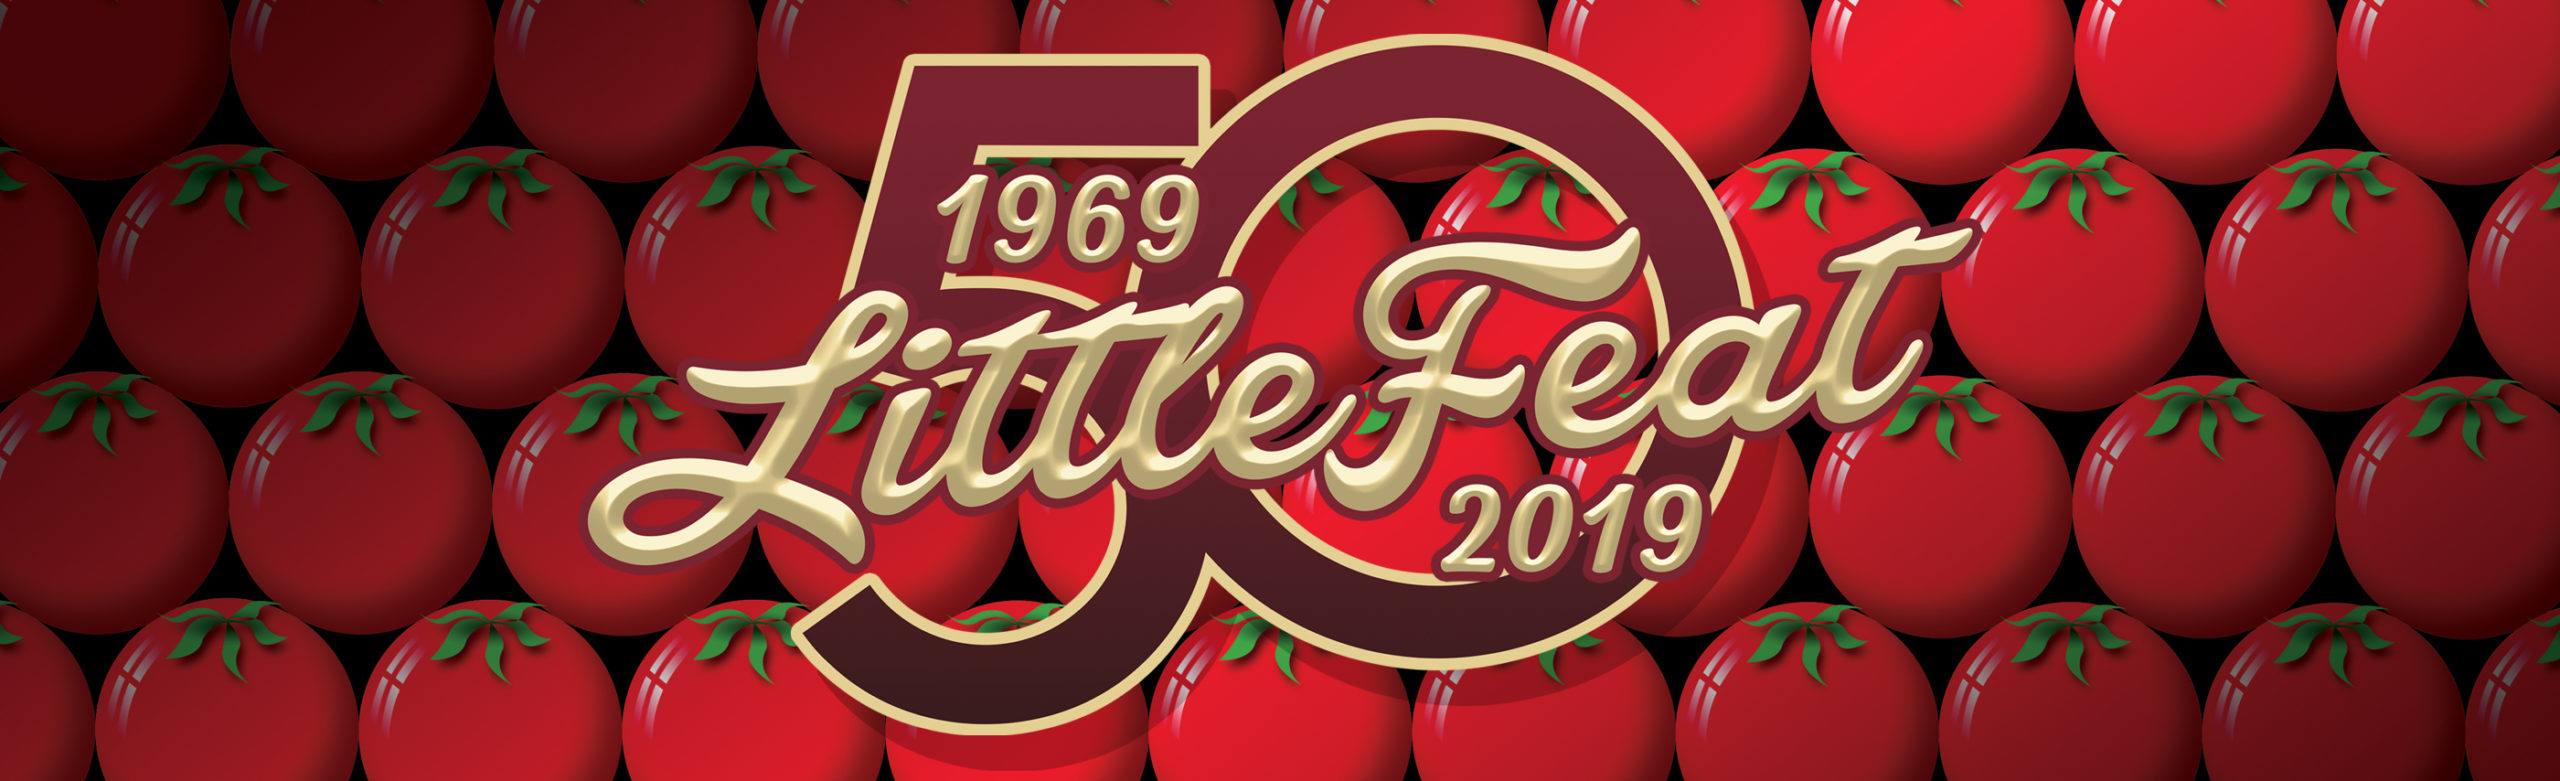 Classic Rock Band Little Feat to Bring 50th Anniversary Tour to Missoula Image